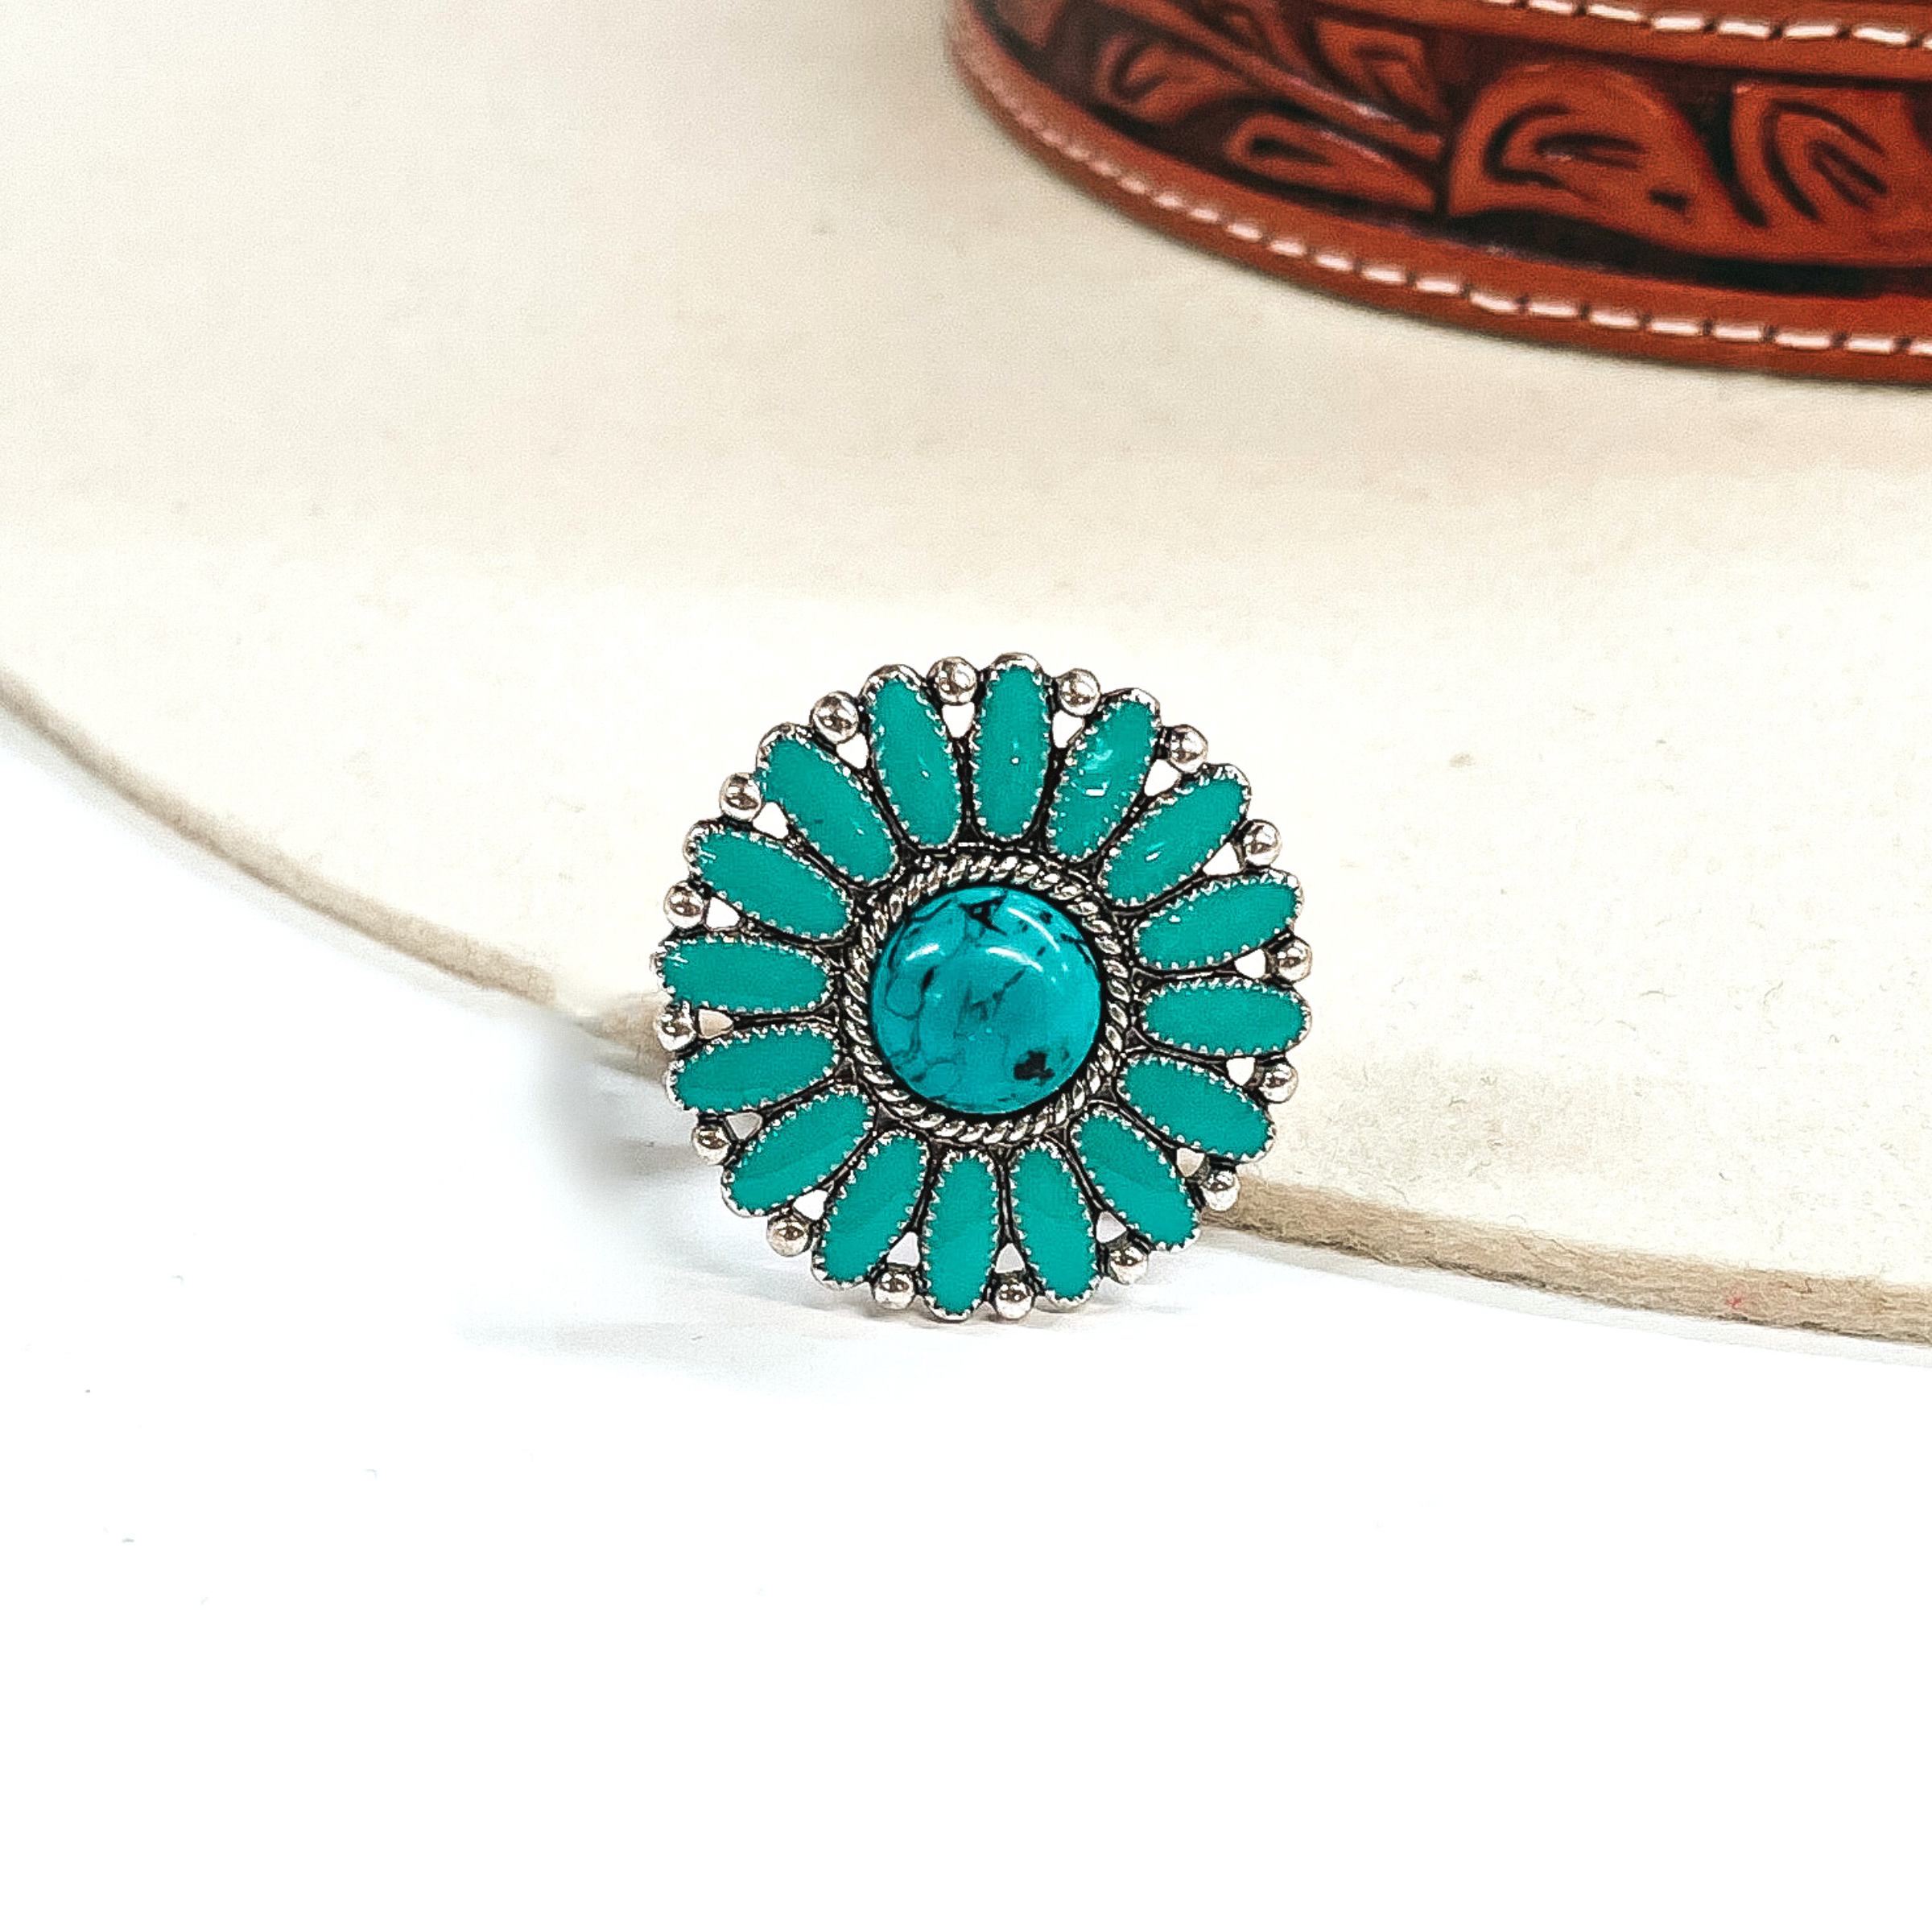 This is a turquoise,circle concho, epoxy cluster ring in a silver setting.  The ring has a small circle stone in the center with a silver, rope textured outline,  with oval shaped stone all around like a flower. In between each 'petal' it has silver  circles all around. This ring is taken on an ivory felt hat  with a brown textured band and on a white background.